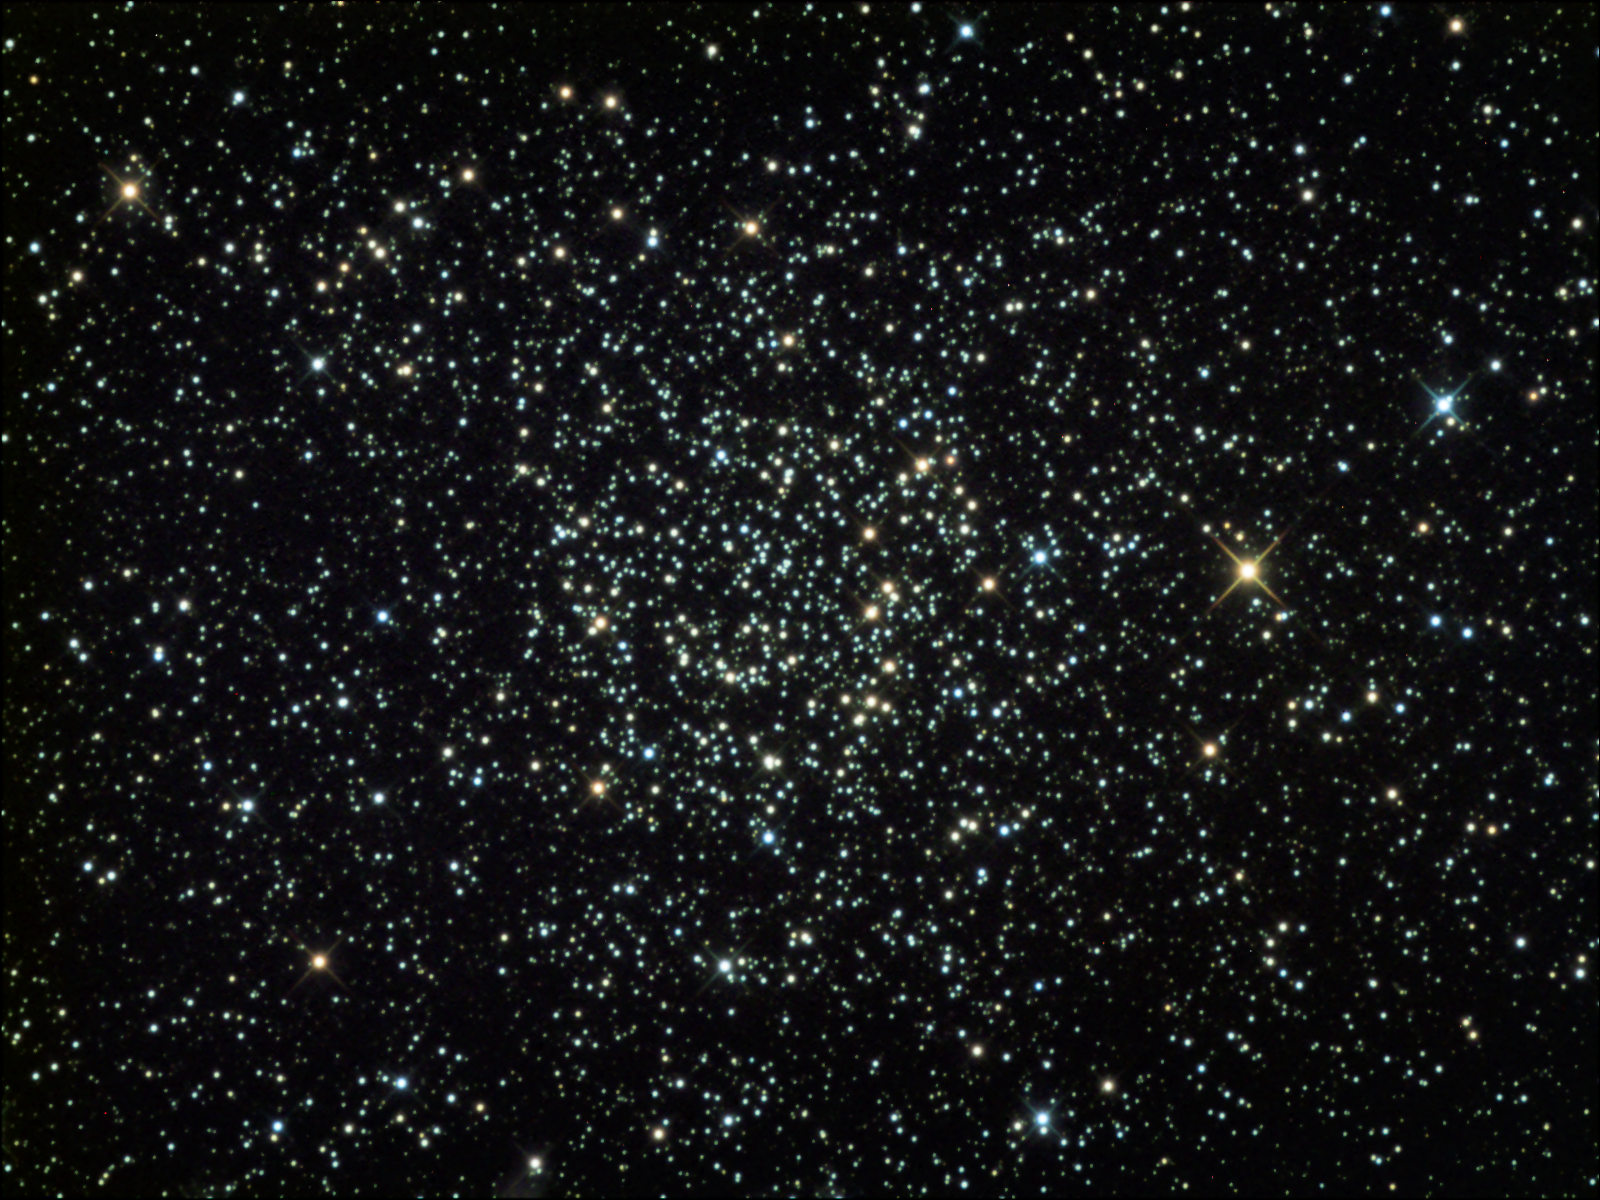 NGC 7789 - Open Cluster in Cassiopeia